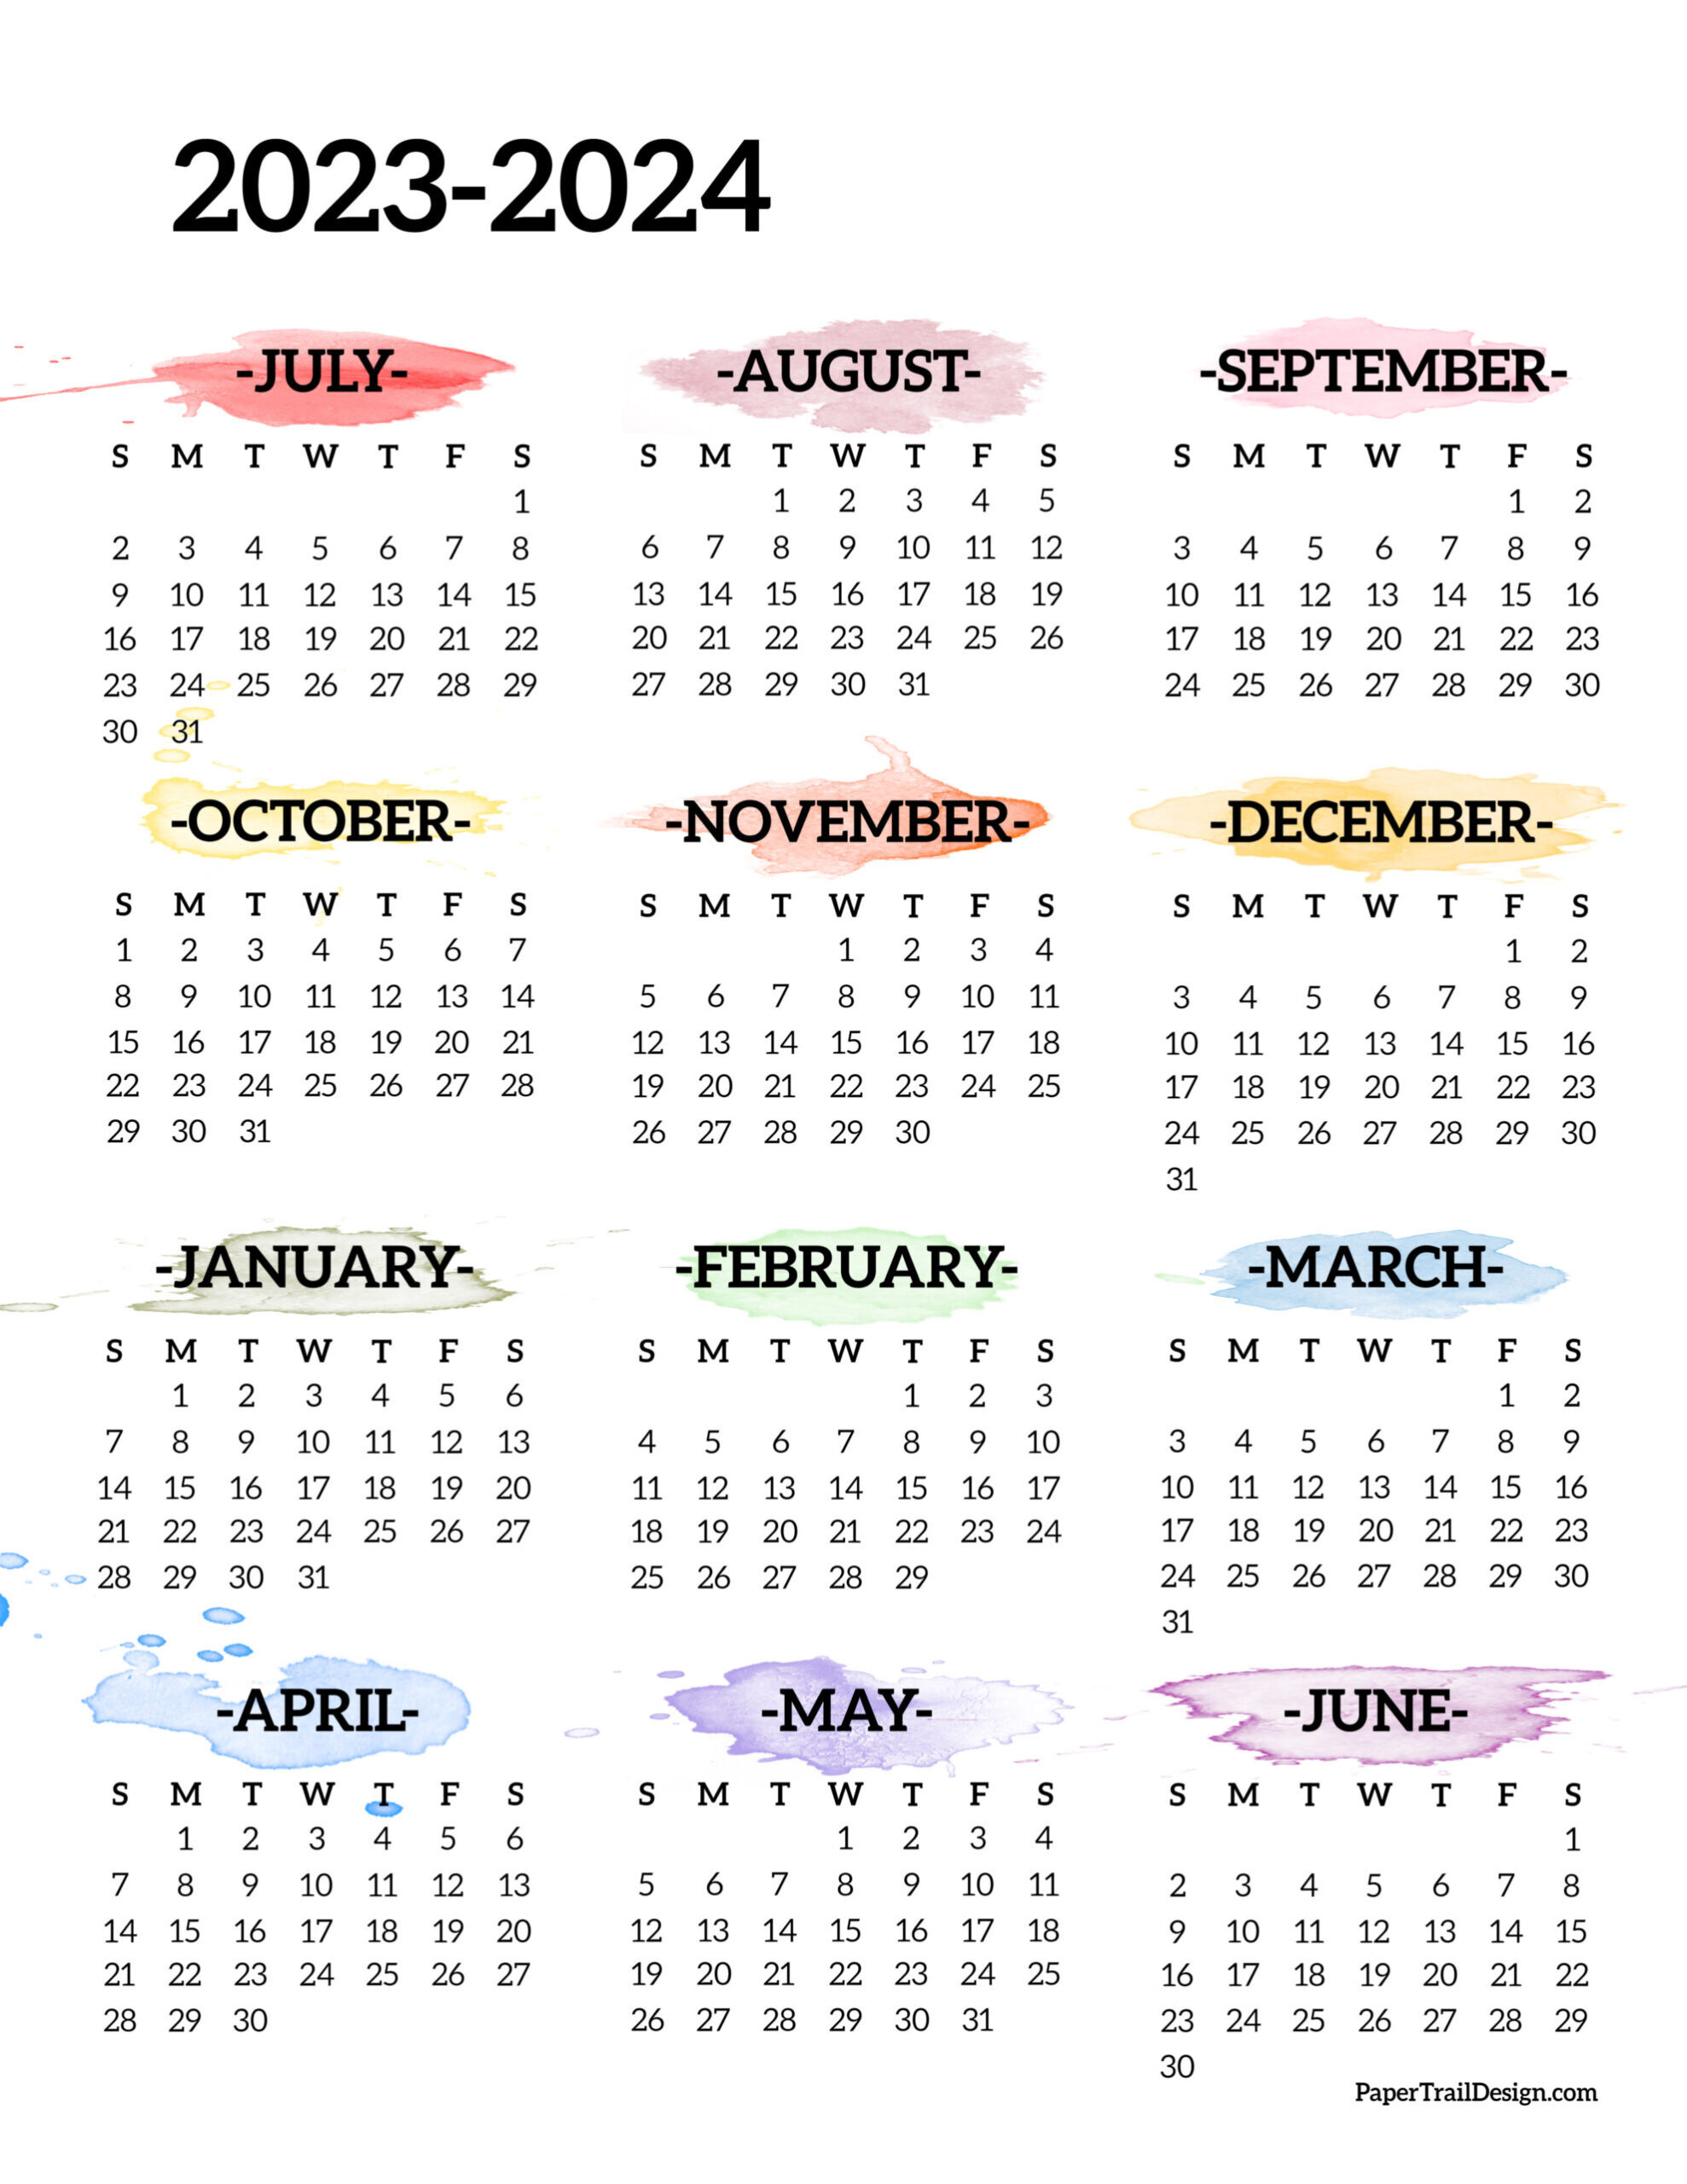 2023-2024 School Year Calendar Free Printable - Paper Trail Design within October 2023 To June 2024 Calendar